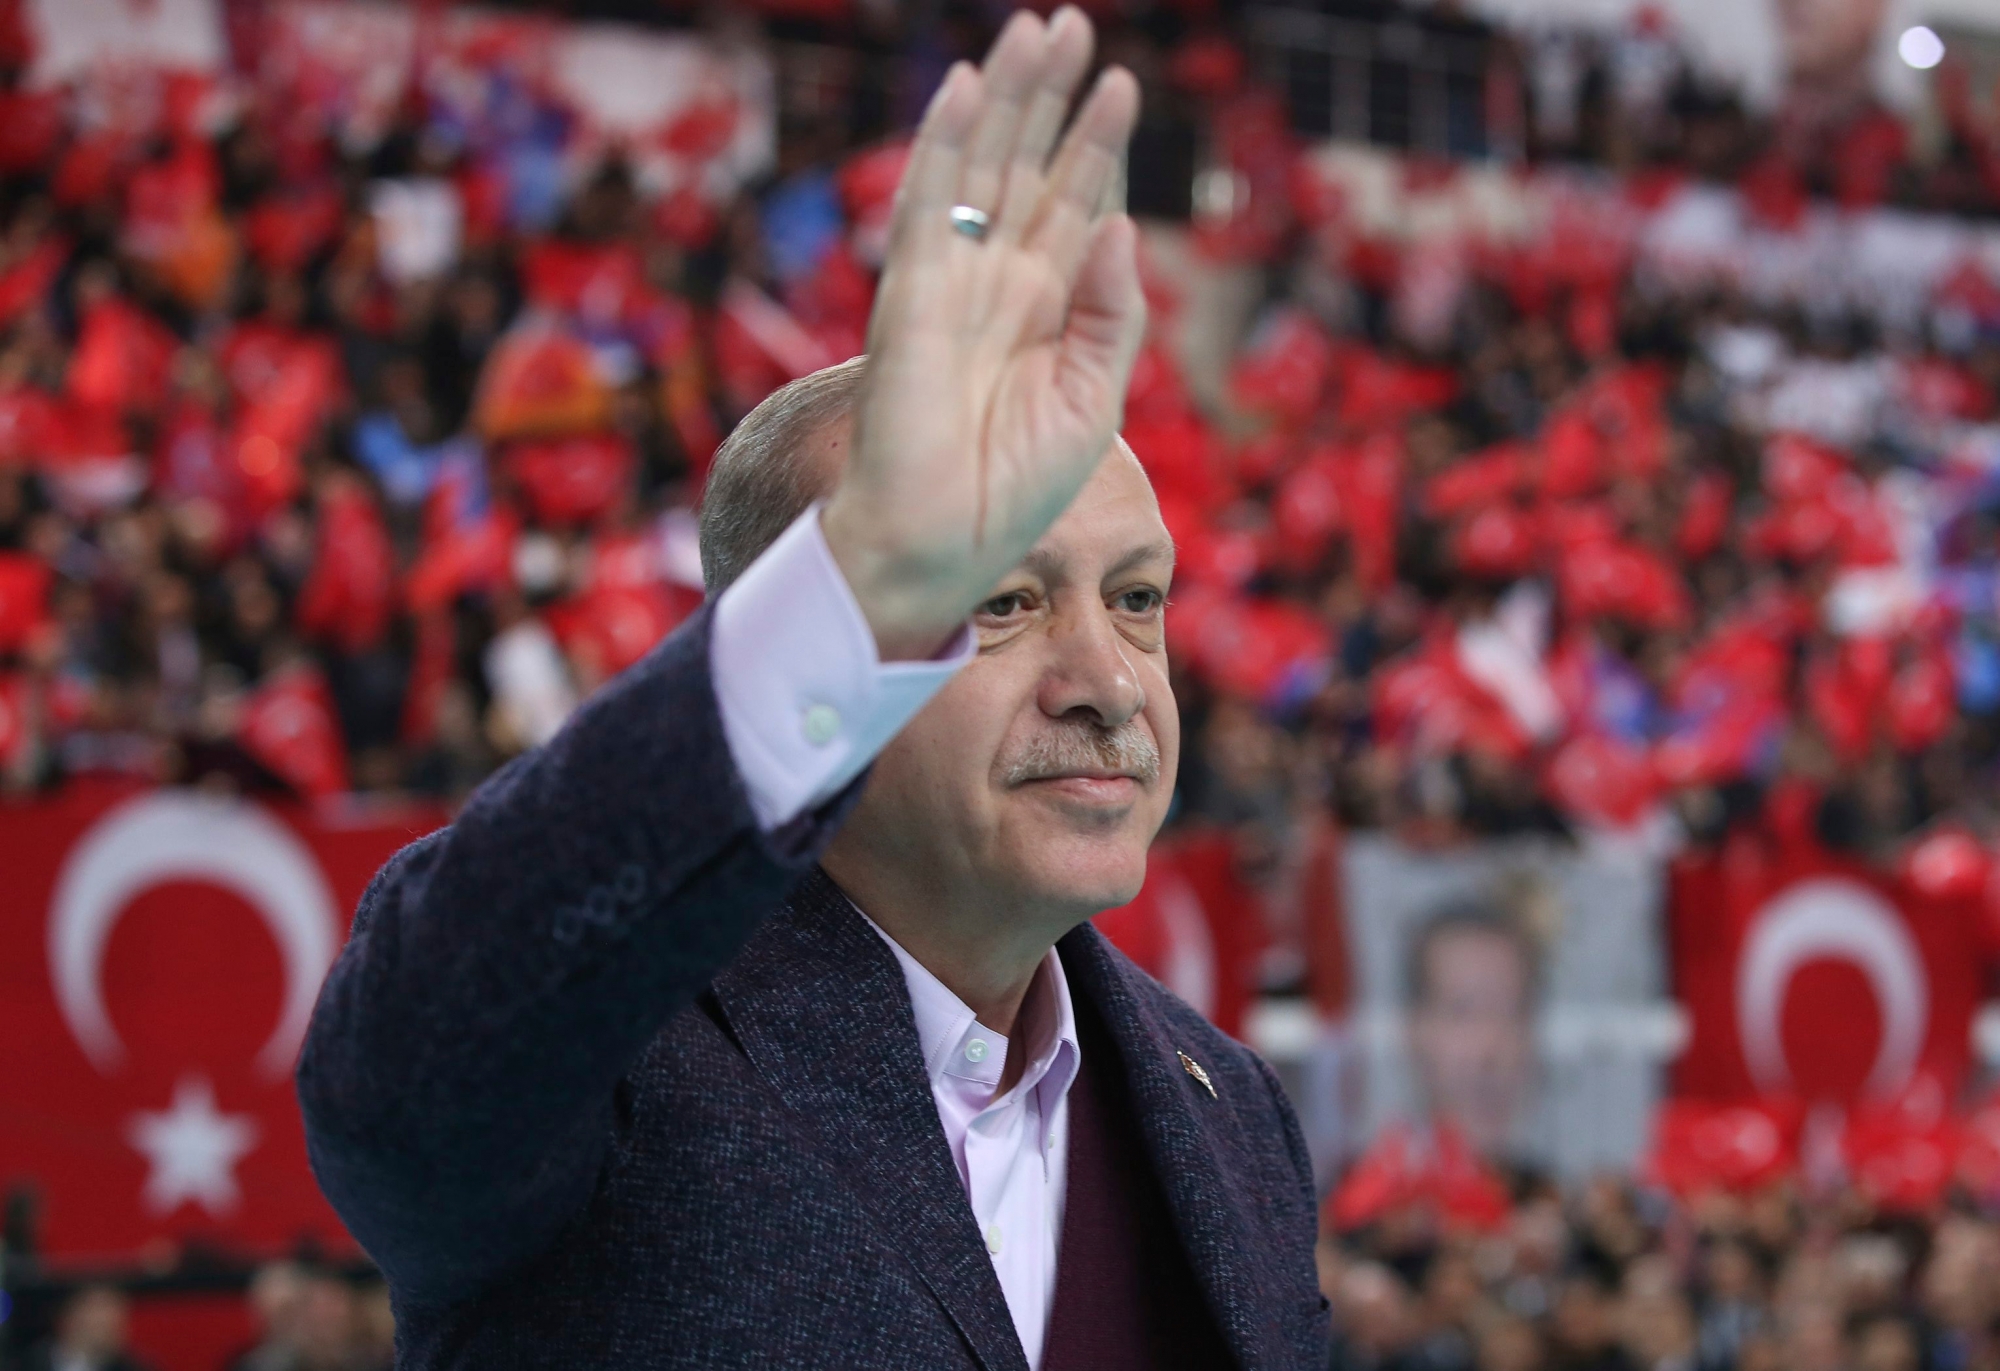 Turkey's President Recep Tayyip Erdogan waves to supporters before delivering a speech at his ruling political party's conference in Sivas, central Turkey, Sunday, Dec. 10, 2017. Erdogan has escalated his vitriol over the U.S decision to recognise Jerusalem as Israel's capital, calling Israel a "terror state''. (Yasin Bulbul/Pool Photo via AP) Turkey Israel Palestinians